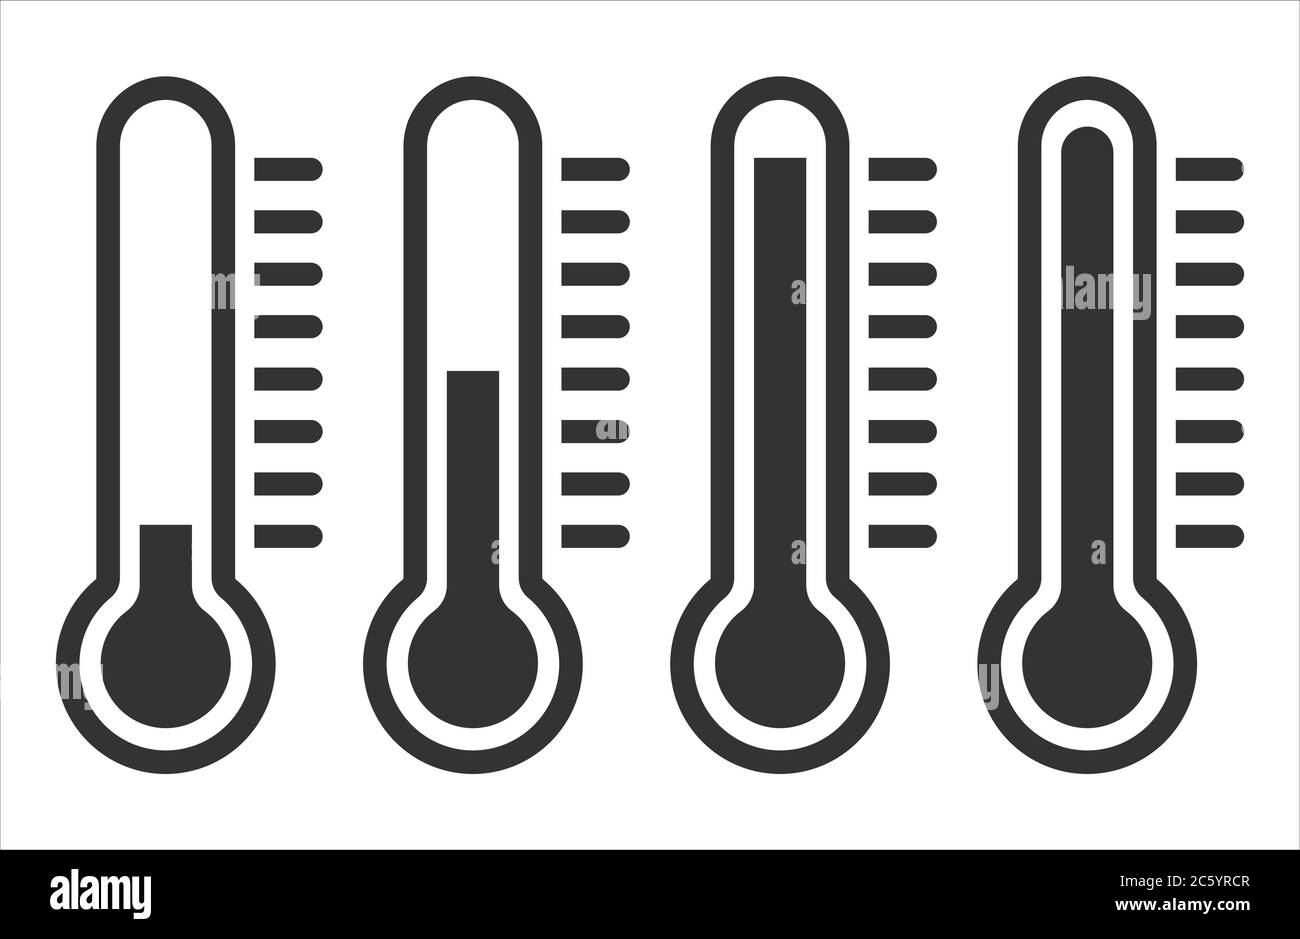 Cartoon flat style Heat thermometer icon shape. Hot Temperature meter logo symbol. Fever temp healthcare sign. Vector illustration image. Isolated on Stock Vector